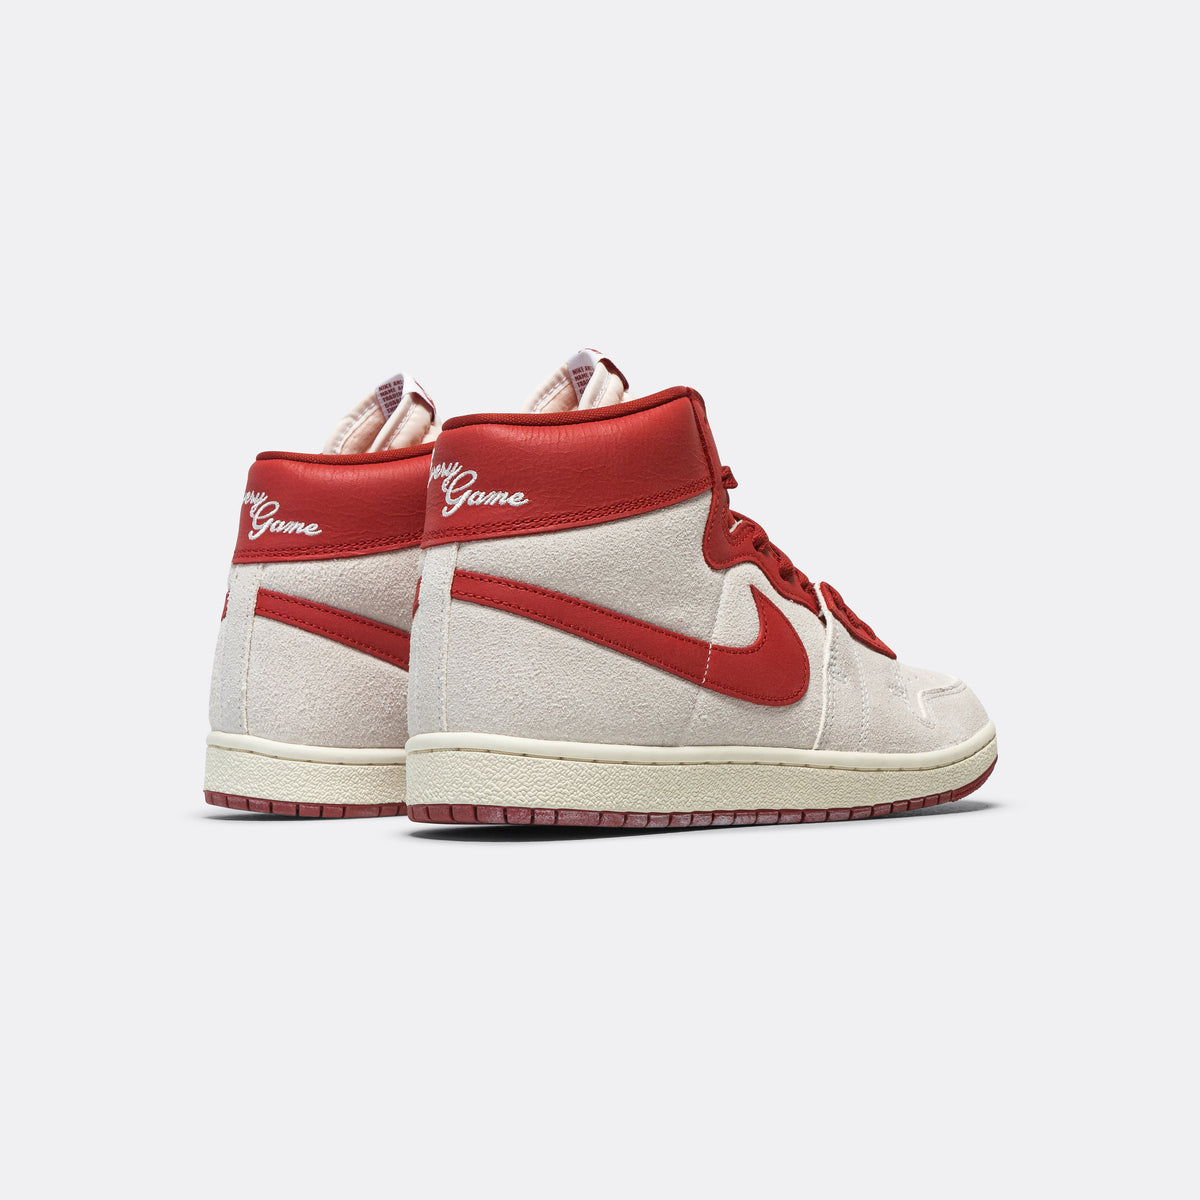 Nike Jordan Air Ship SP - Summit White/Dune Red | Up There | UP THERE